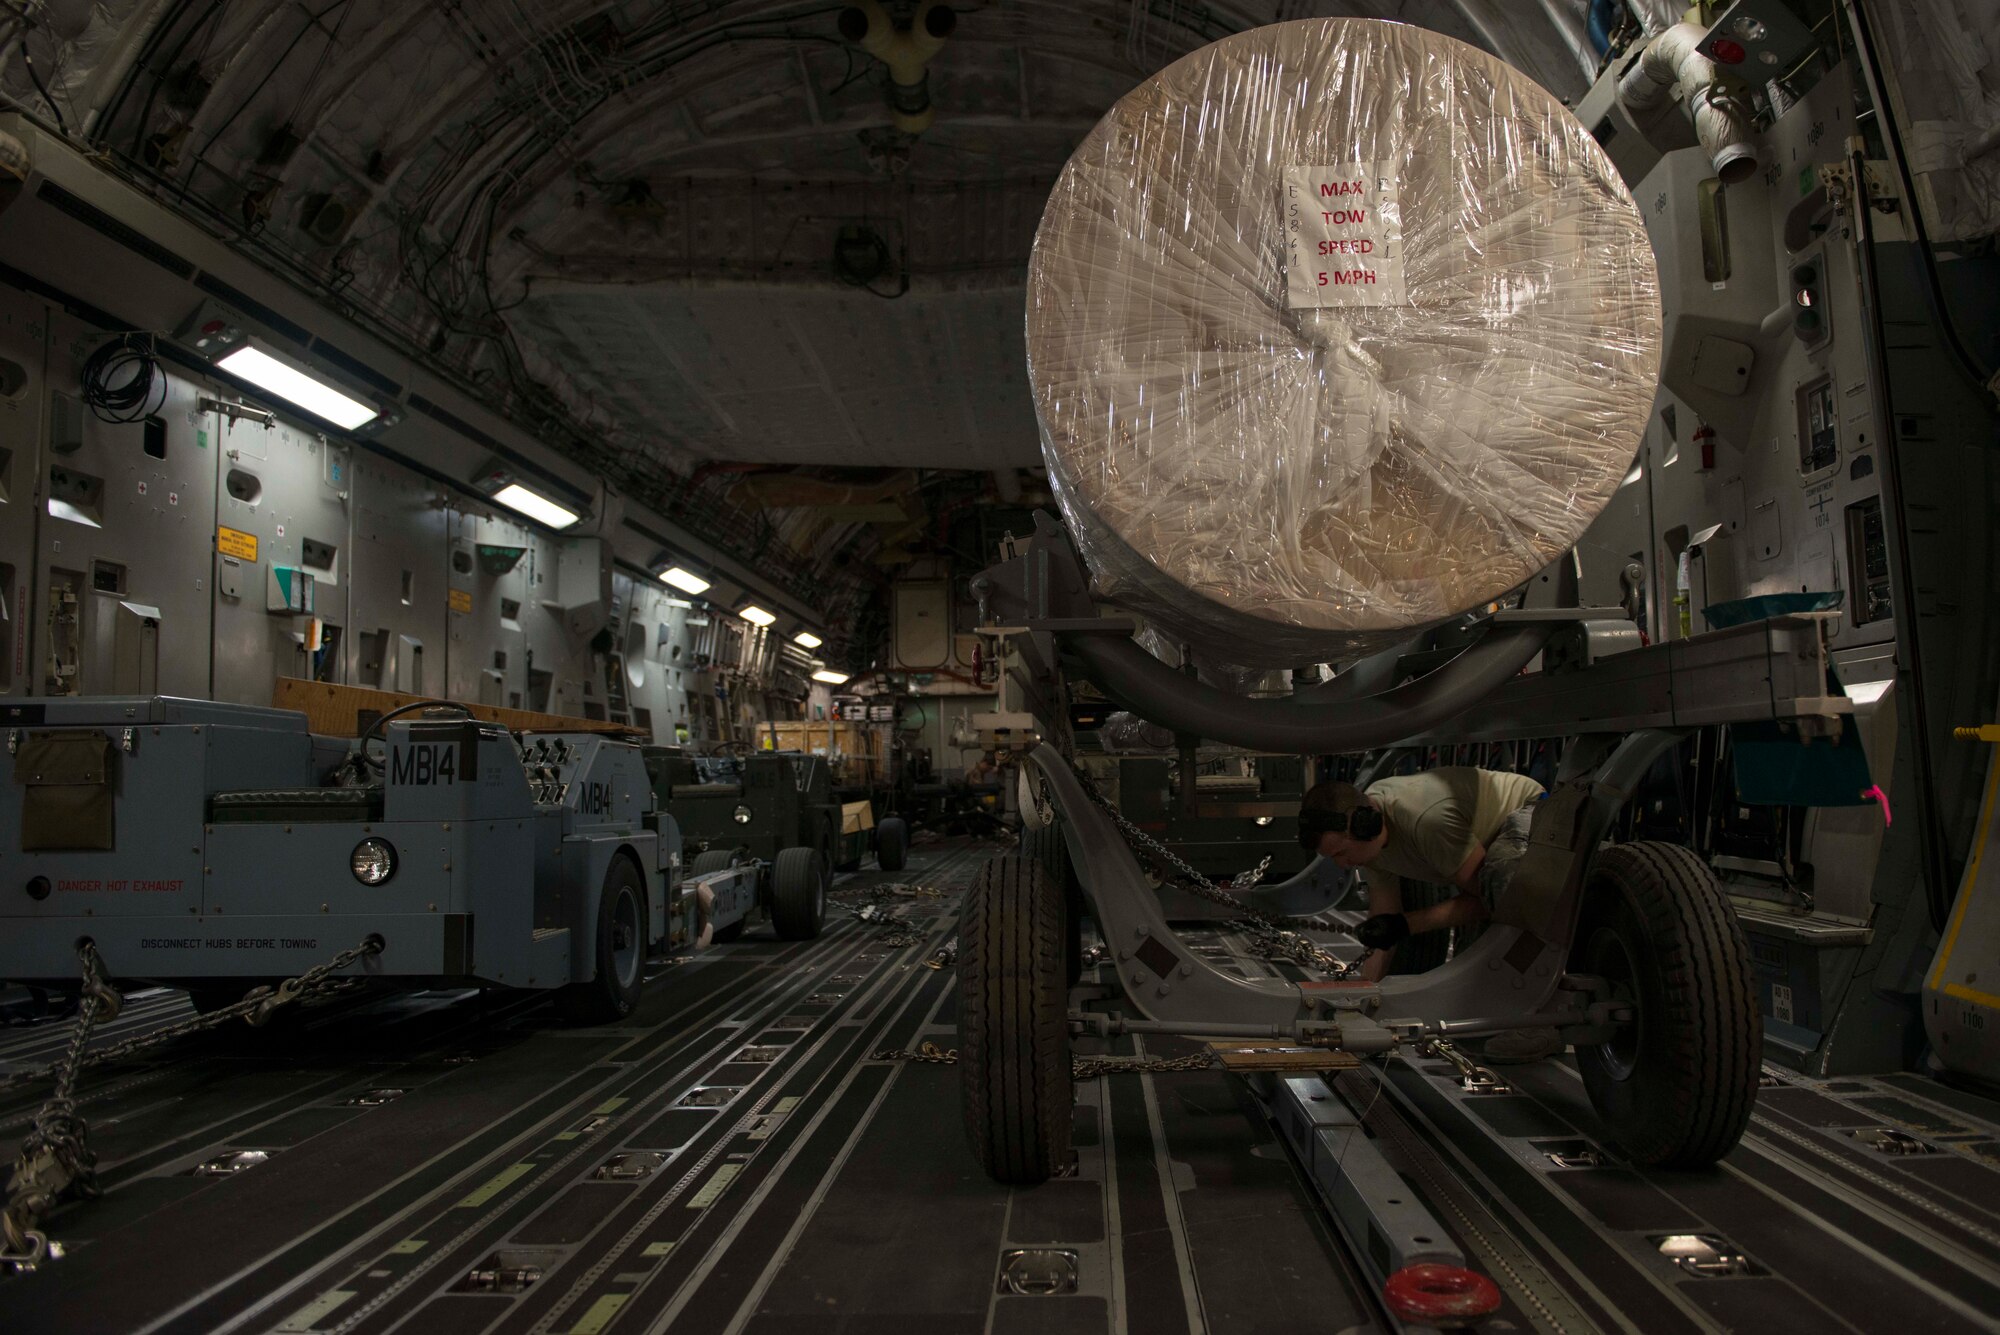 A U.S. Airman assigned to the 7th Airlift Squadron fastens cargo aboard a C-17 Globemaster III Oct. 21, 2016, at Incirlik Air Base, Turkey. C-17s can alter its cargo bay to accommodate different loads. (U.S. Air Force photo by Senior Airman John Nieves Camacho) 